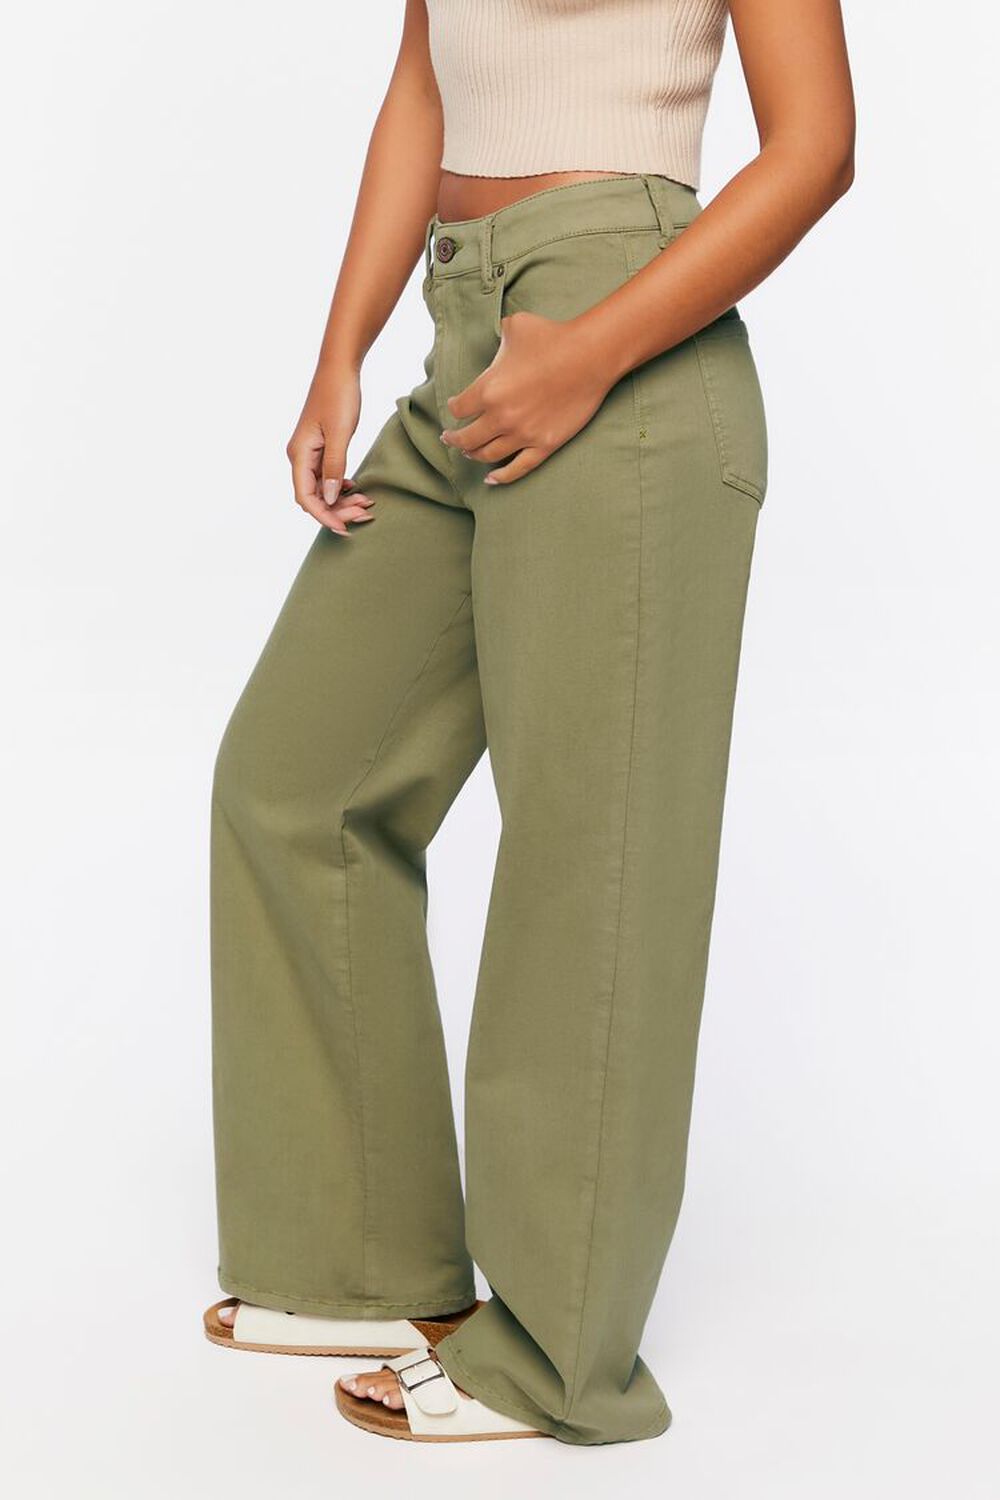 OLIVE High-Rise Wide-Leg Jeans, image 3